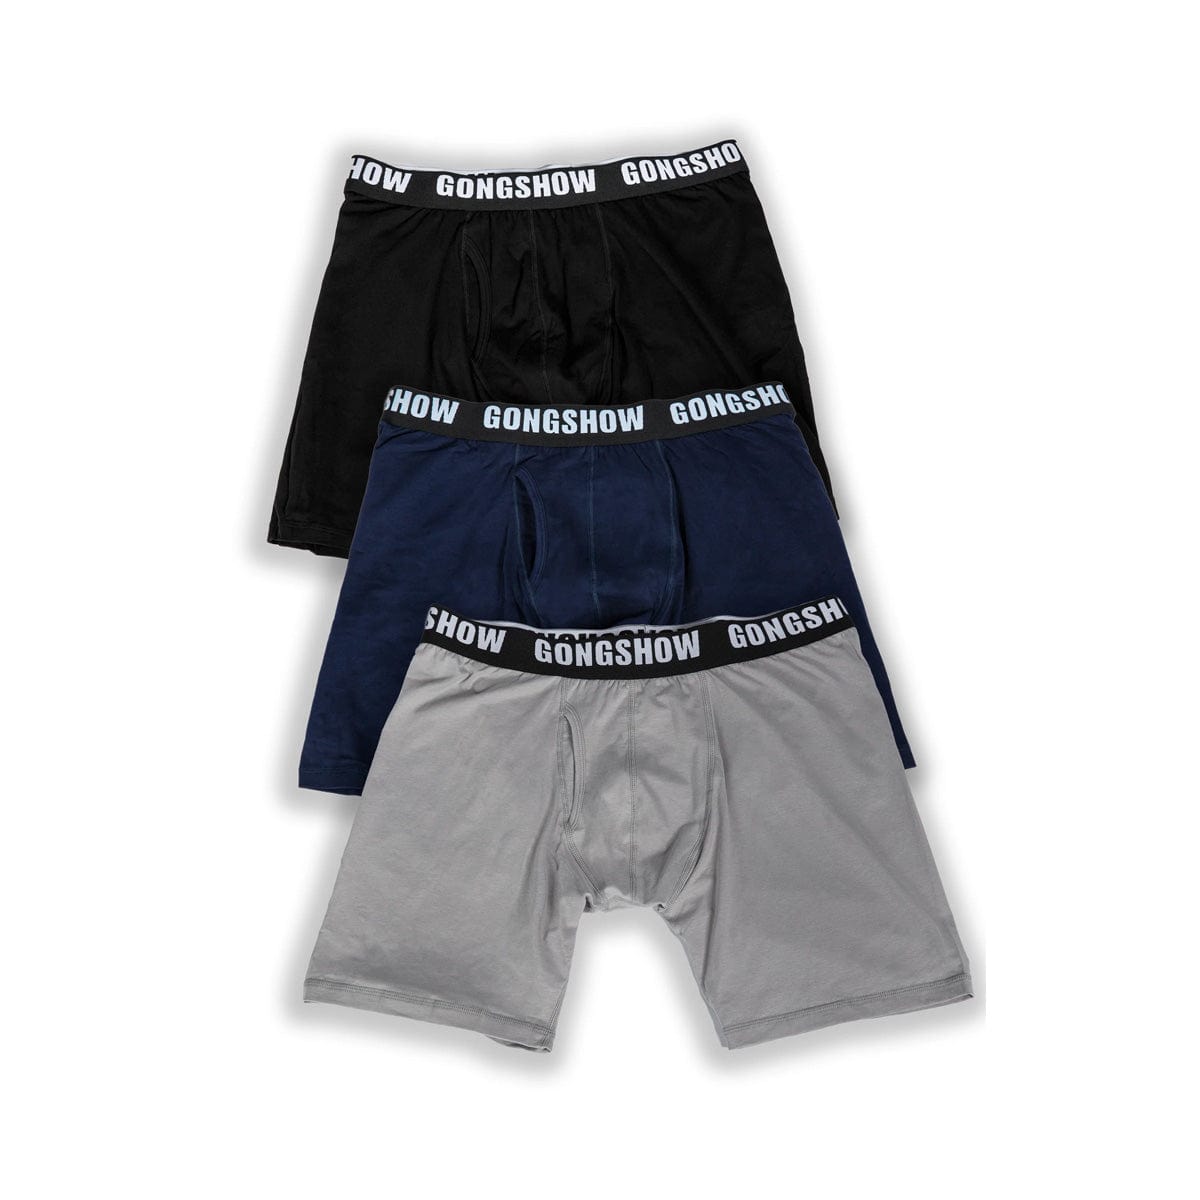 Gongshow Hockey Natty Boxers - 3 Pack - The Hockey Shop Source For Sports